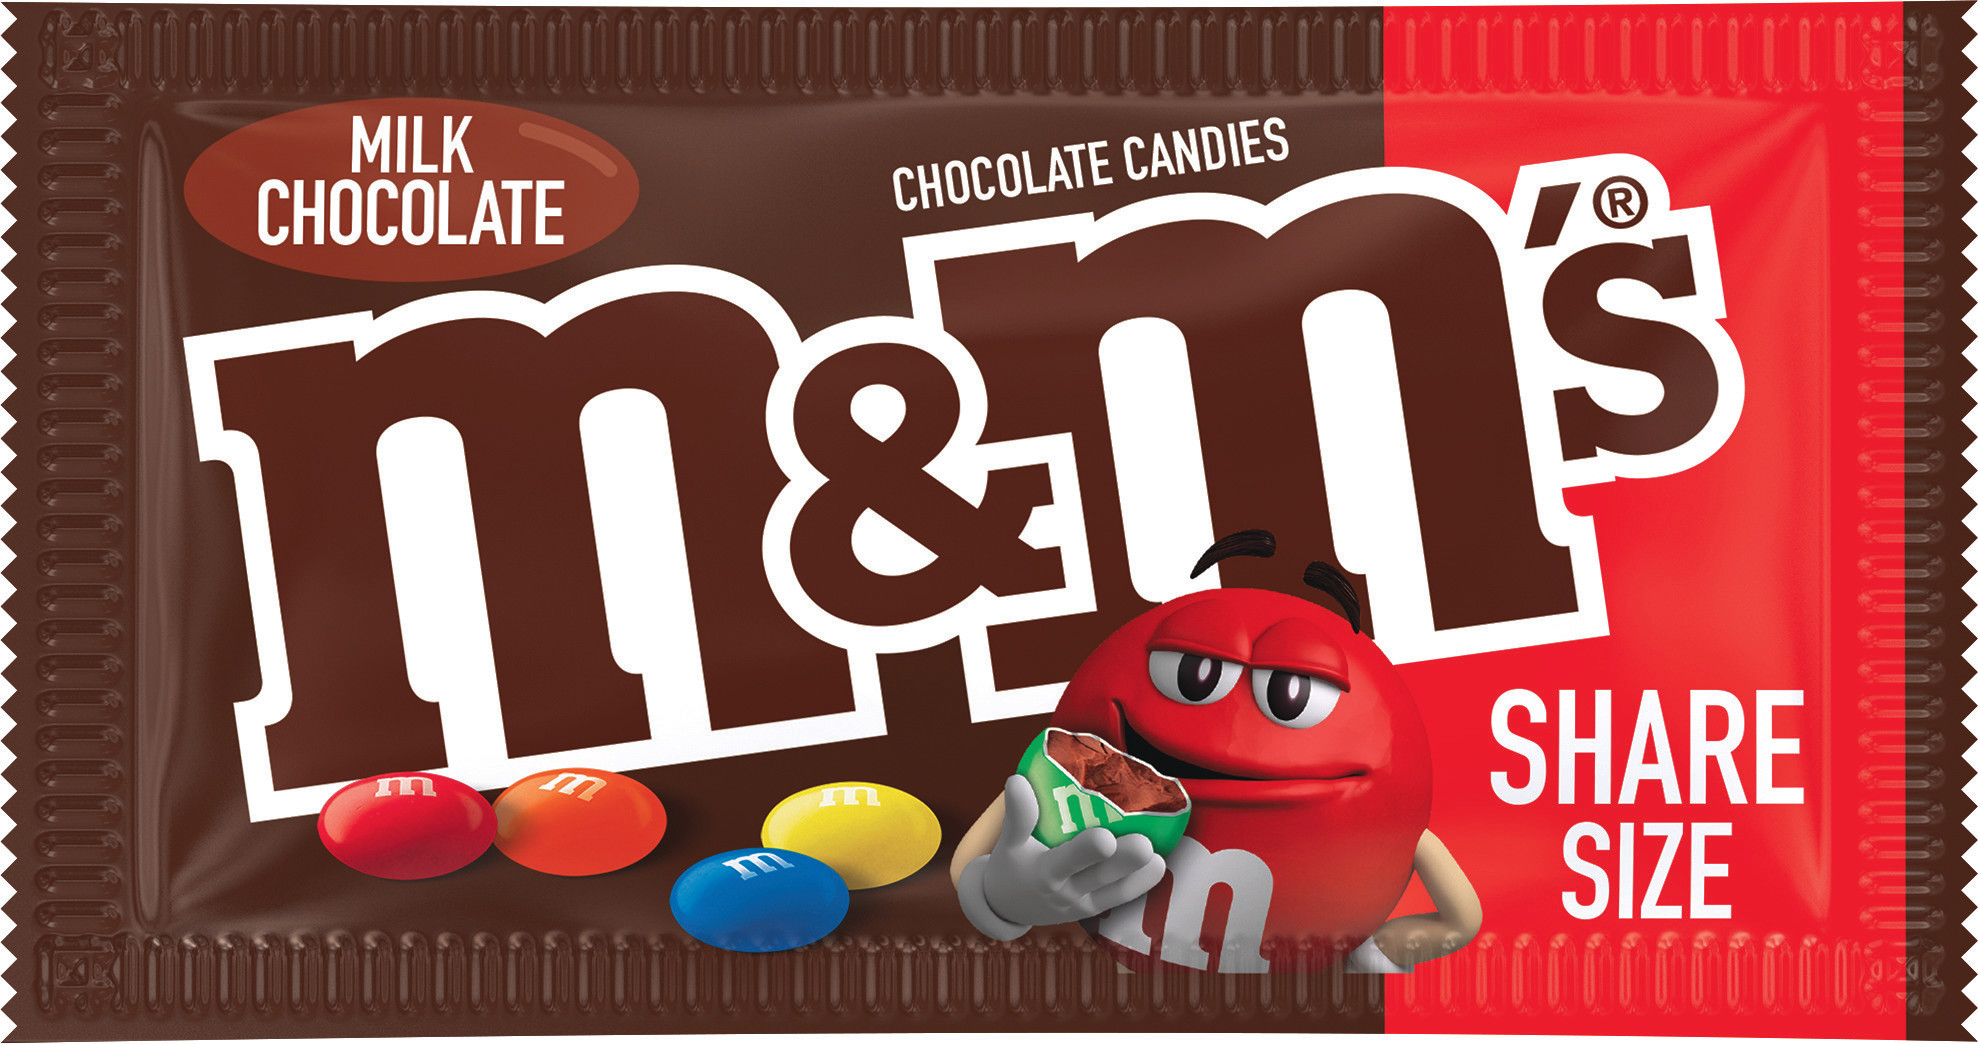 M&M's Milk Chocolate Candy, Share Size - 3.14 oz Bag - image 1 of 12